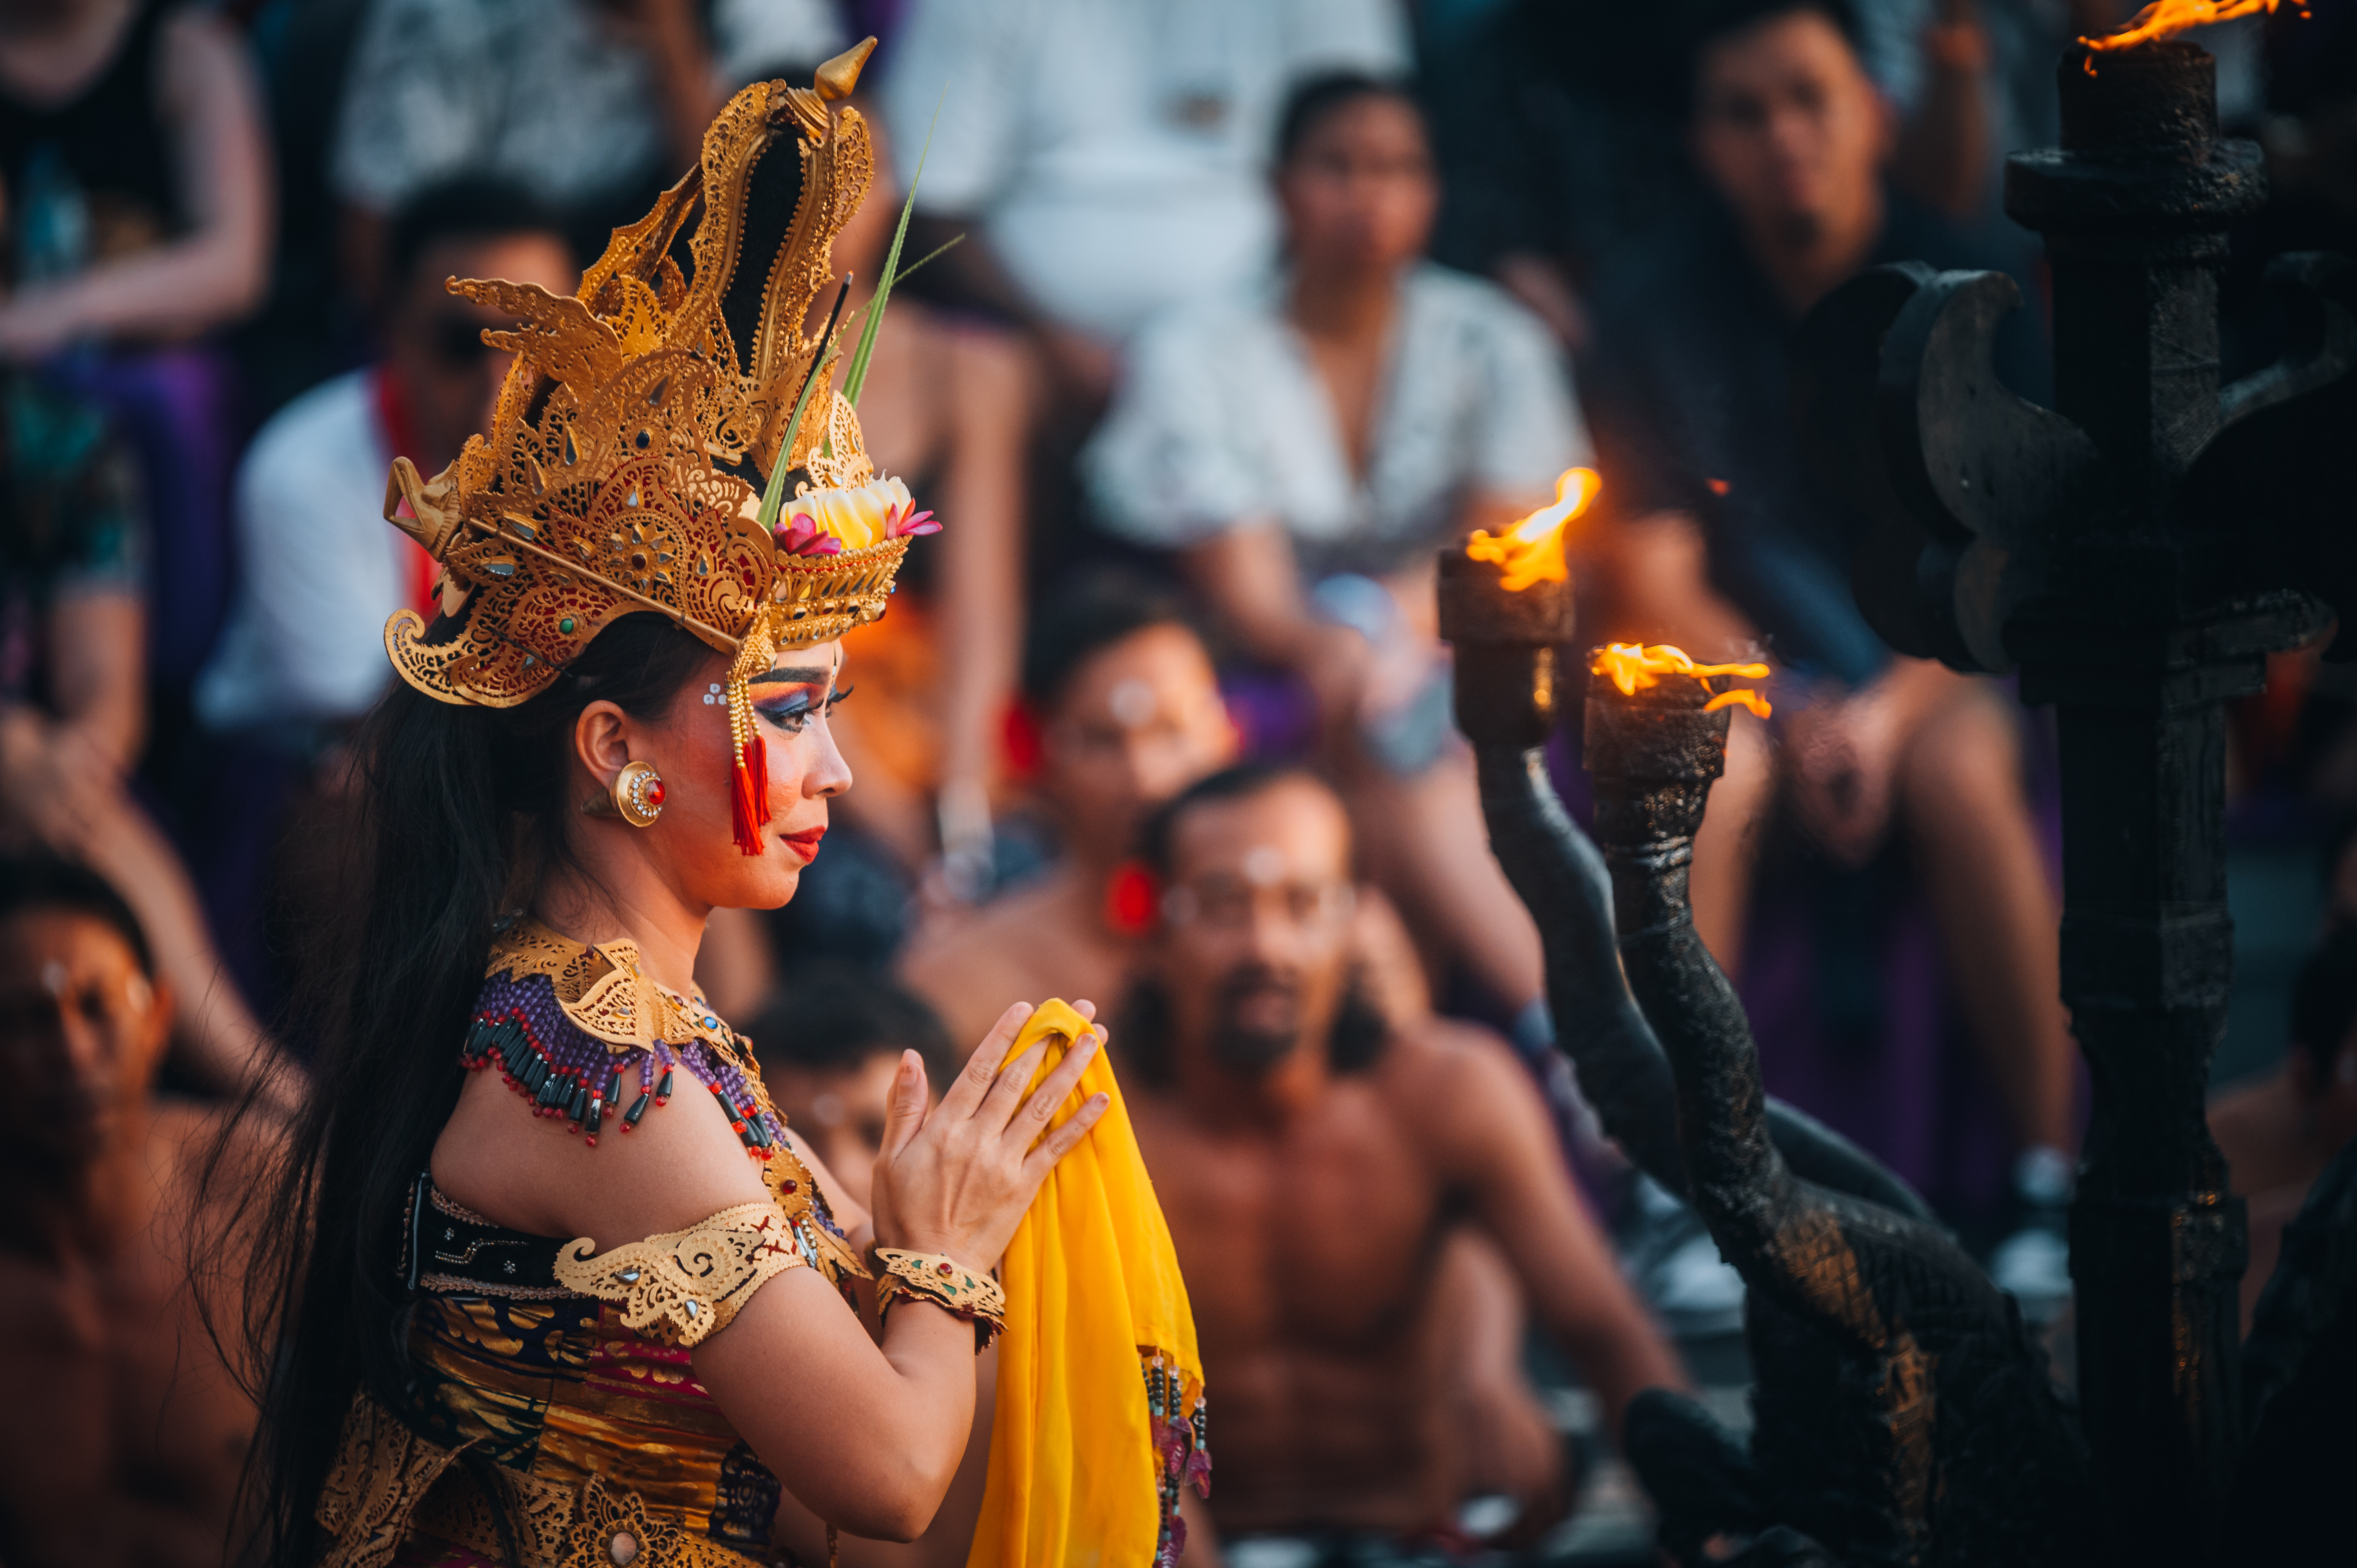 A woman performing the Kecak fire dance in Bali